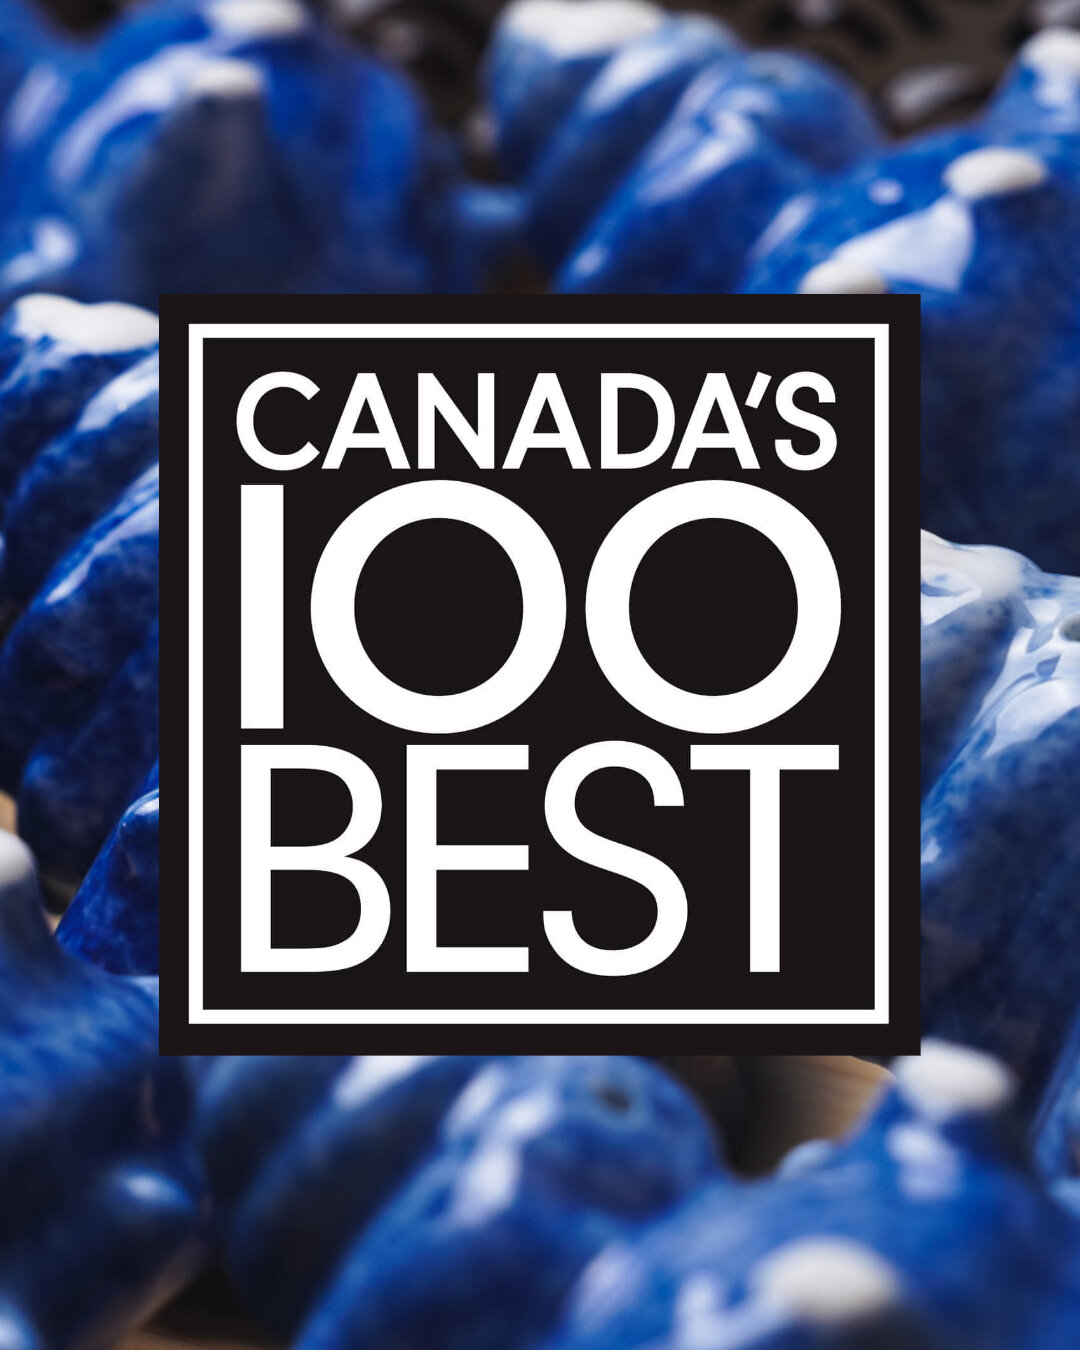 ✨​​​​​​​​​
We are honoured &amp; elated after an amazing week of accolades by @canadasbest100 and @vanmag_com ! 

We would like to extend our gratitude and heartfelt thanks to both outlets as well as our esteemed guests who continue to grace us with 